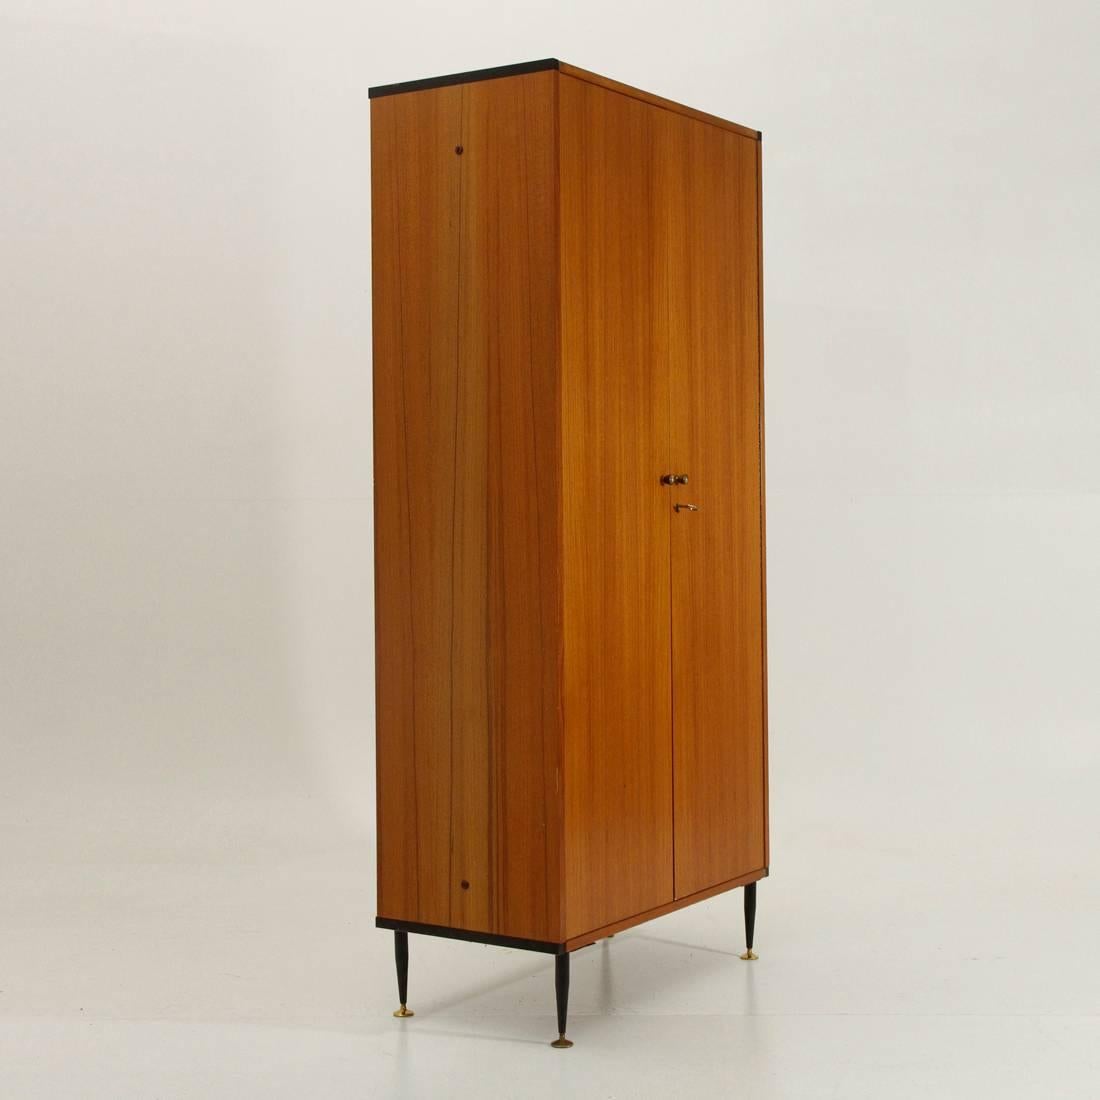 Wardrobe produced in the 1960s by AV Arredamenti Moderni.
Teak frame, corners in black painted metal section.
Legs in black painted metal with adjustable brass feet.
Brass handles.
Inside the cabinet pull-out hanger, ties hanger, and two